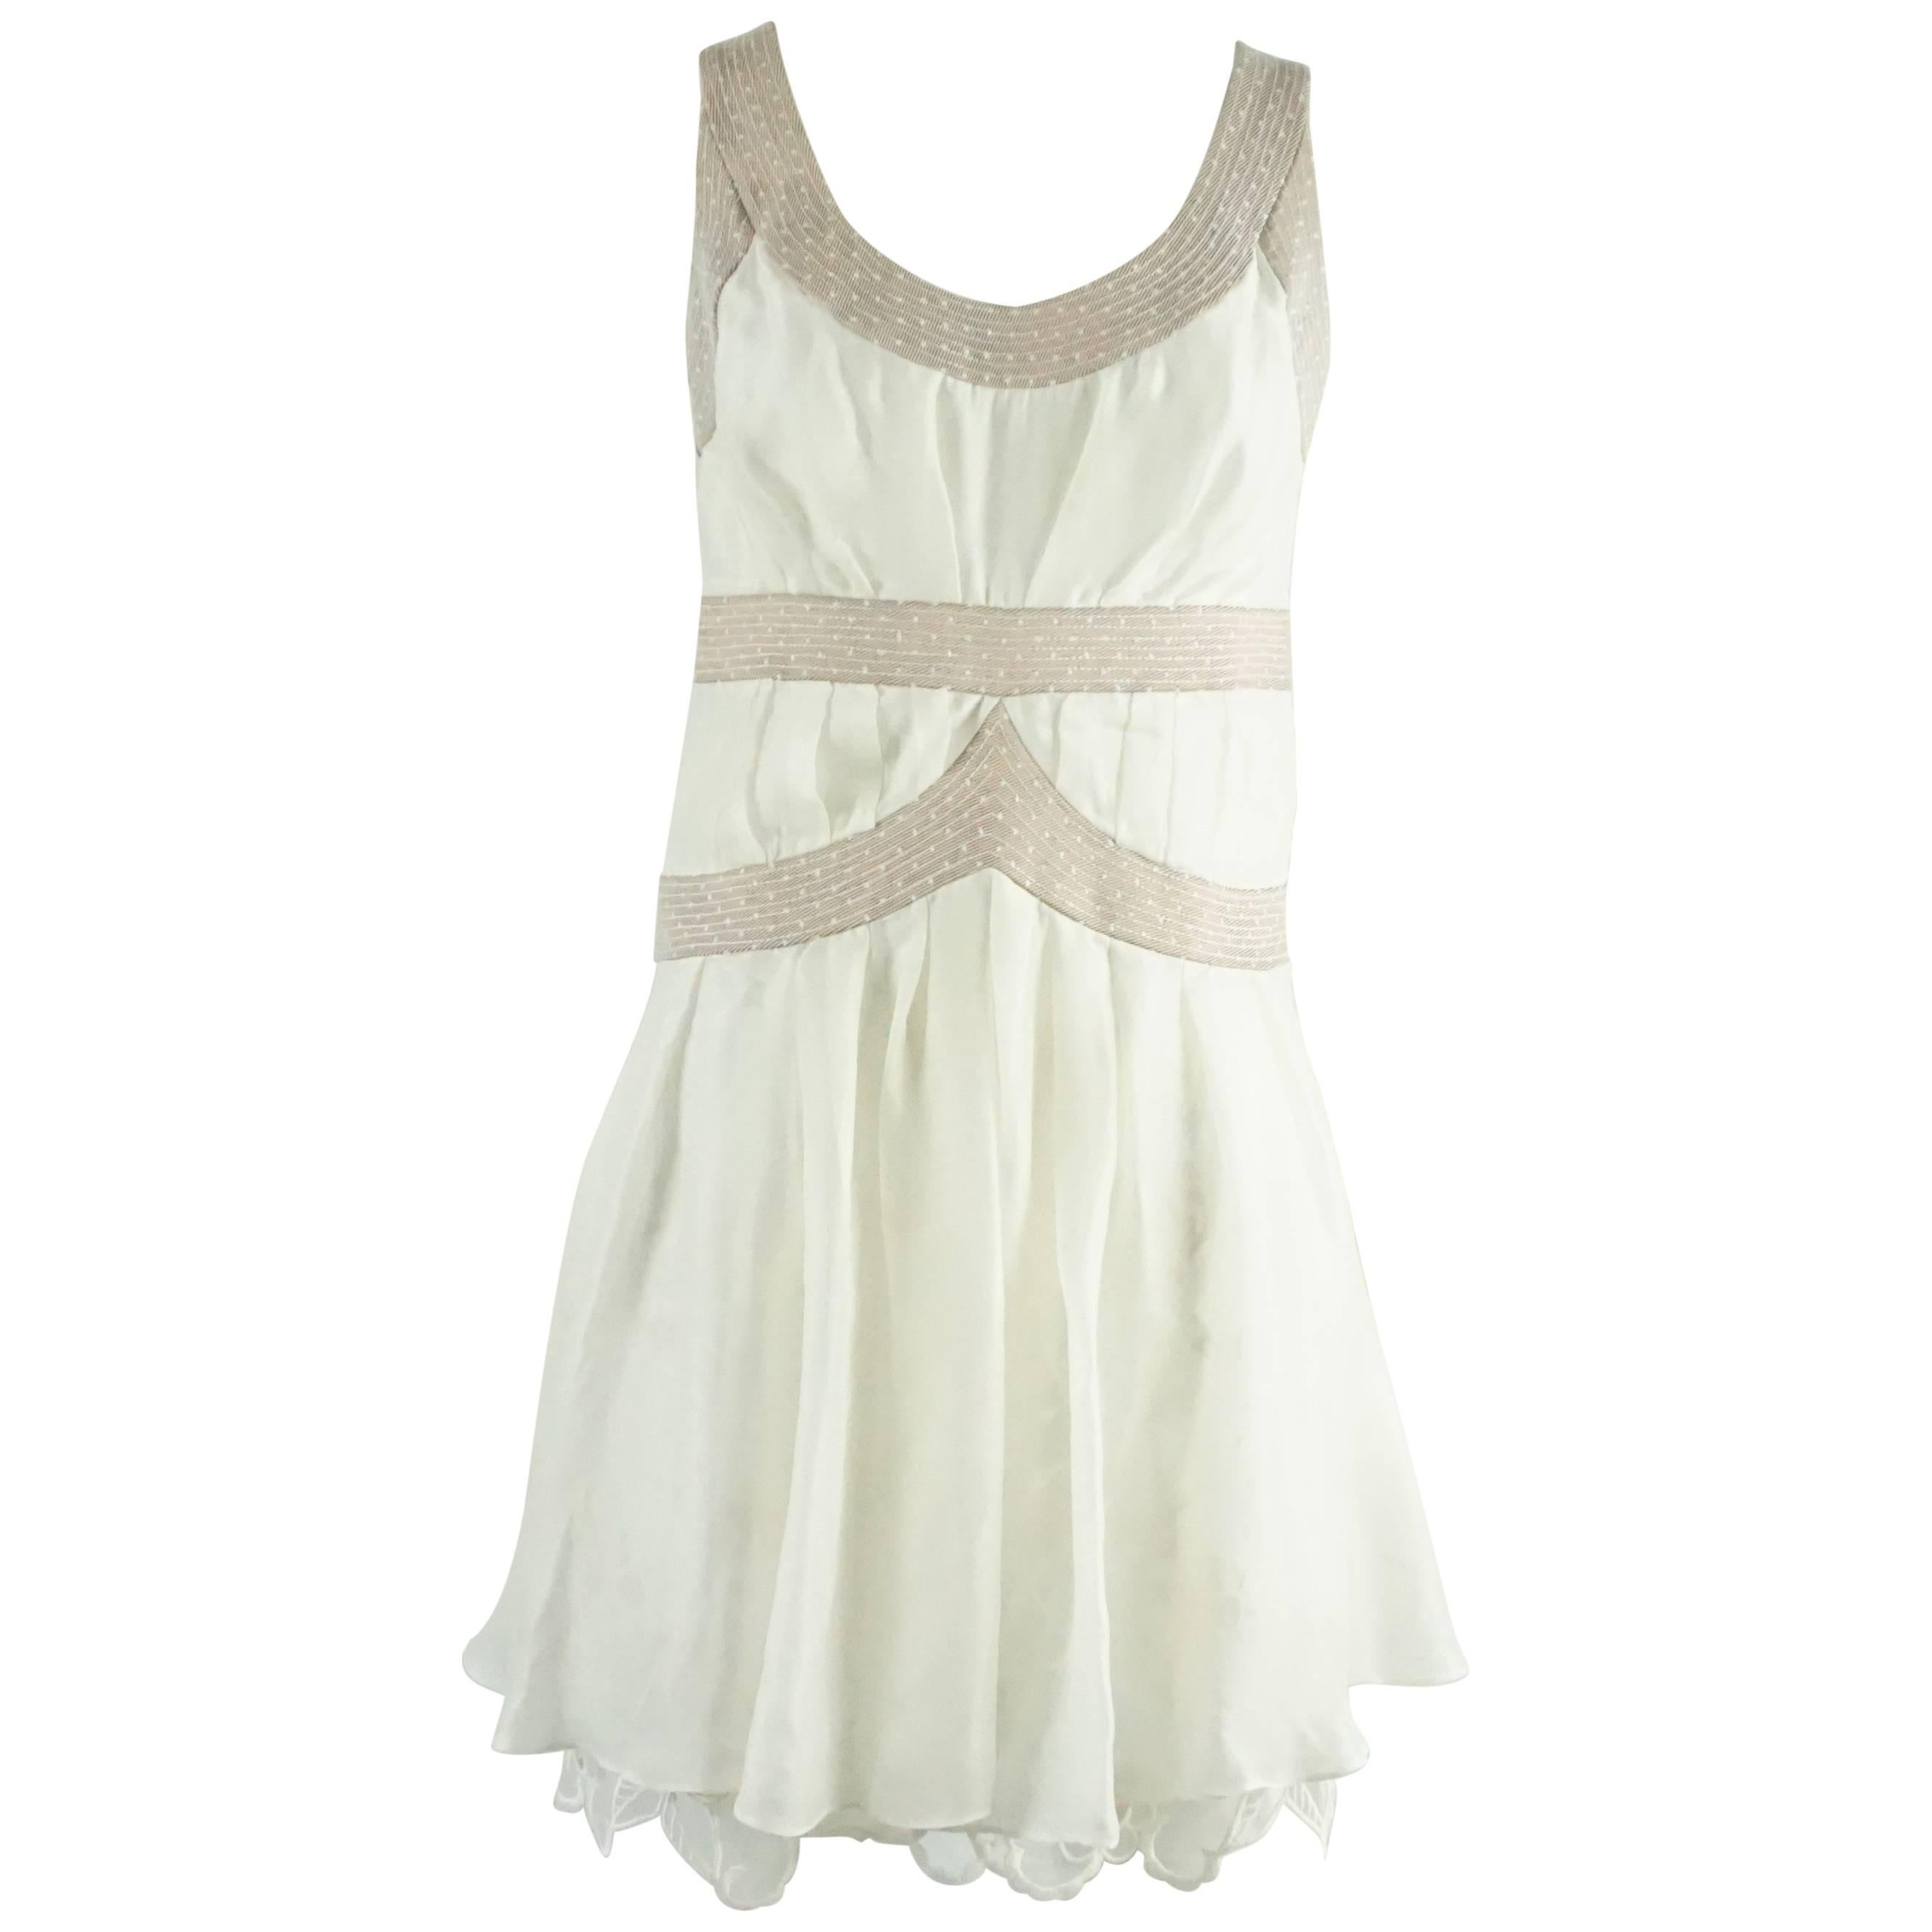 Nina Ricci Runway Spring 2006 Ivory Cotton and Lace Dress-US Size 6 For Sale